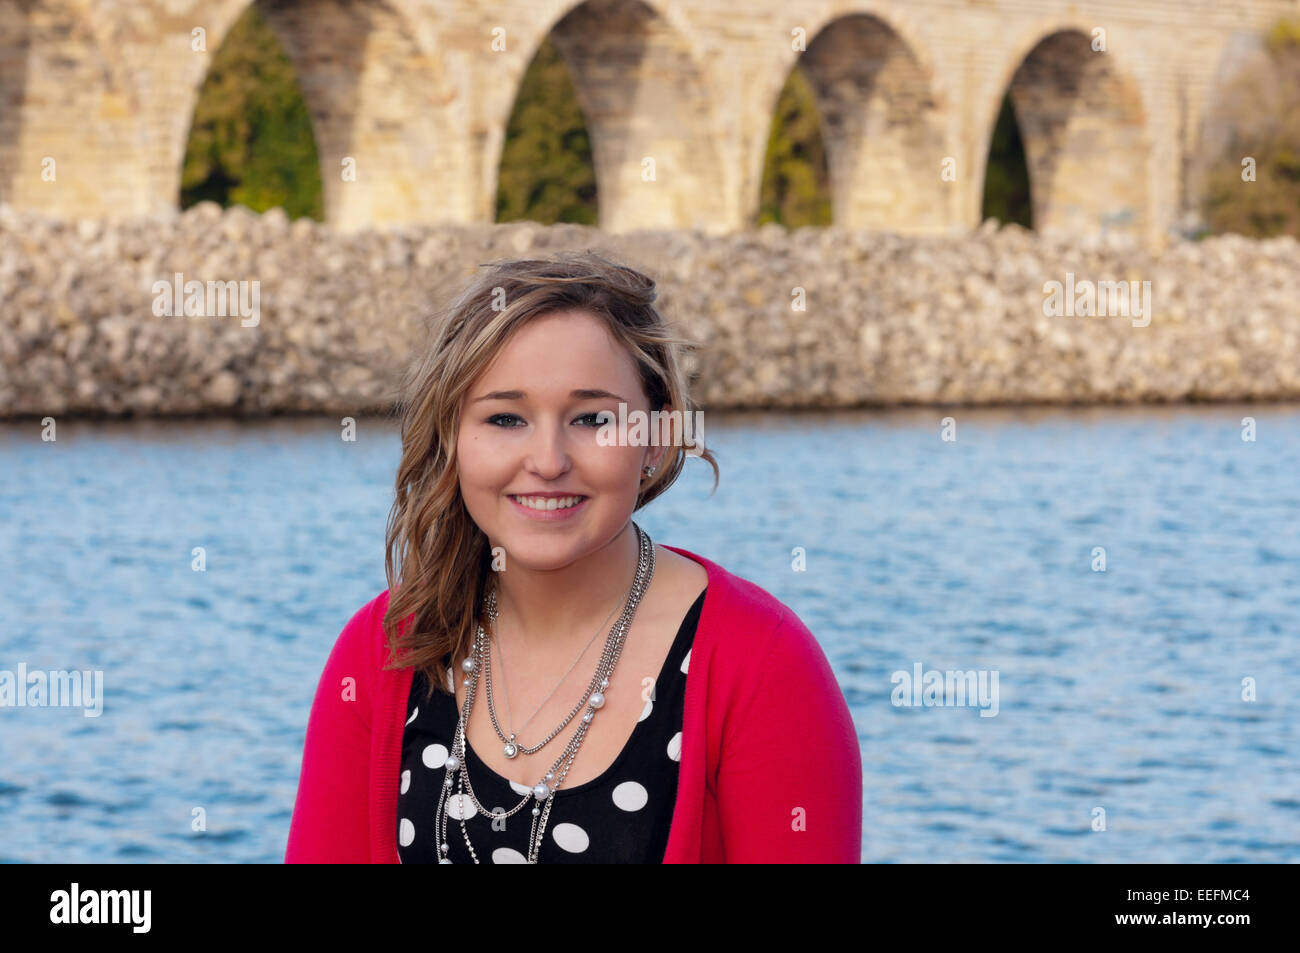 Outdoor head and shoulders portrait of young adult or teen female smiling with stone arch bridge of minneapolis in background Stock Photo